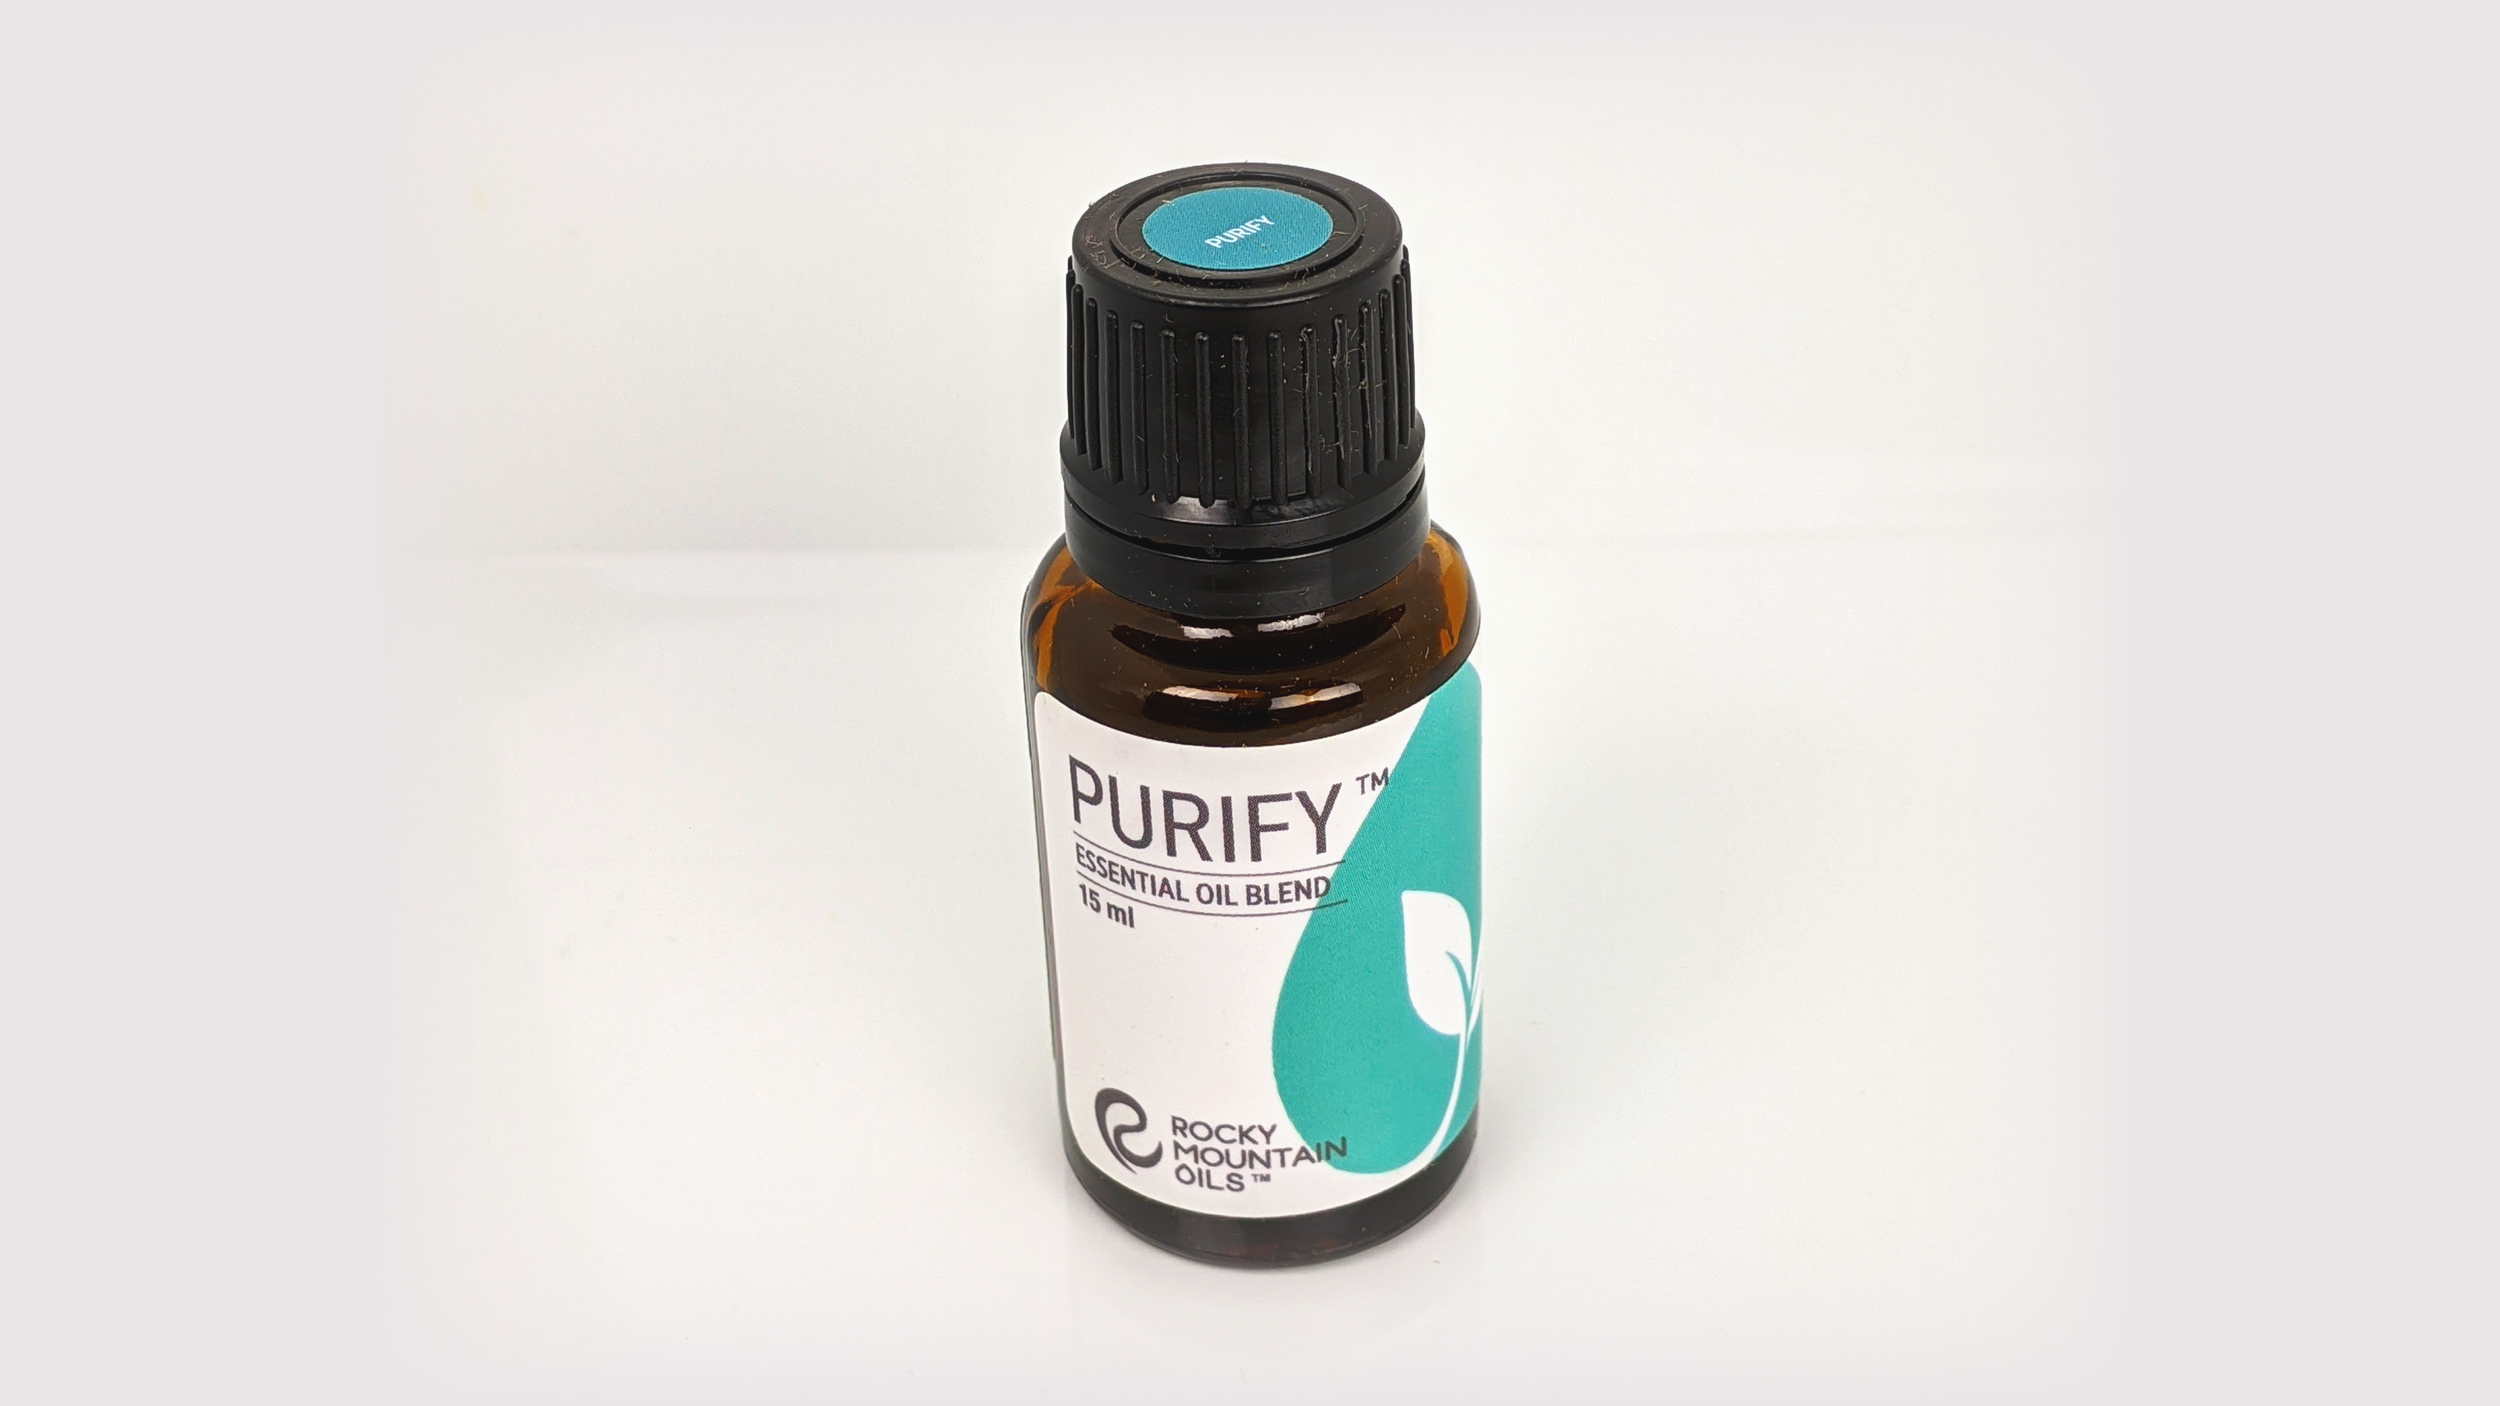 RMO’s  purify essential oil blend  contains multiple natural cleaners. The smell is much better if tea tree oil’s scent bothers you. Use it as an alternative or in addition to tea tree as you wish.